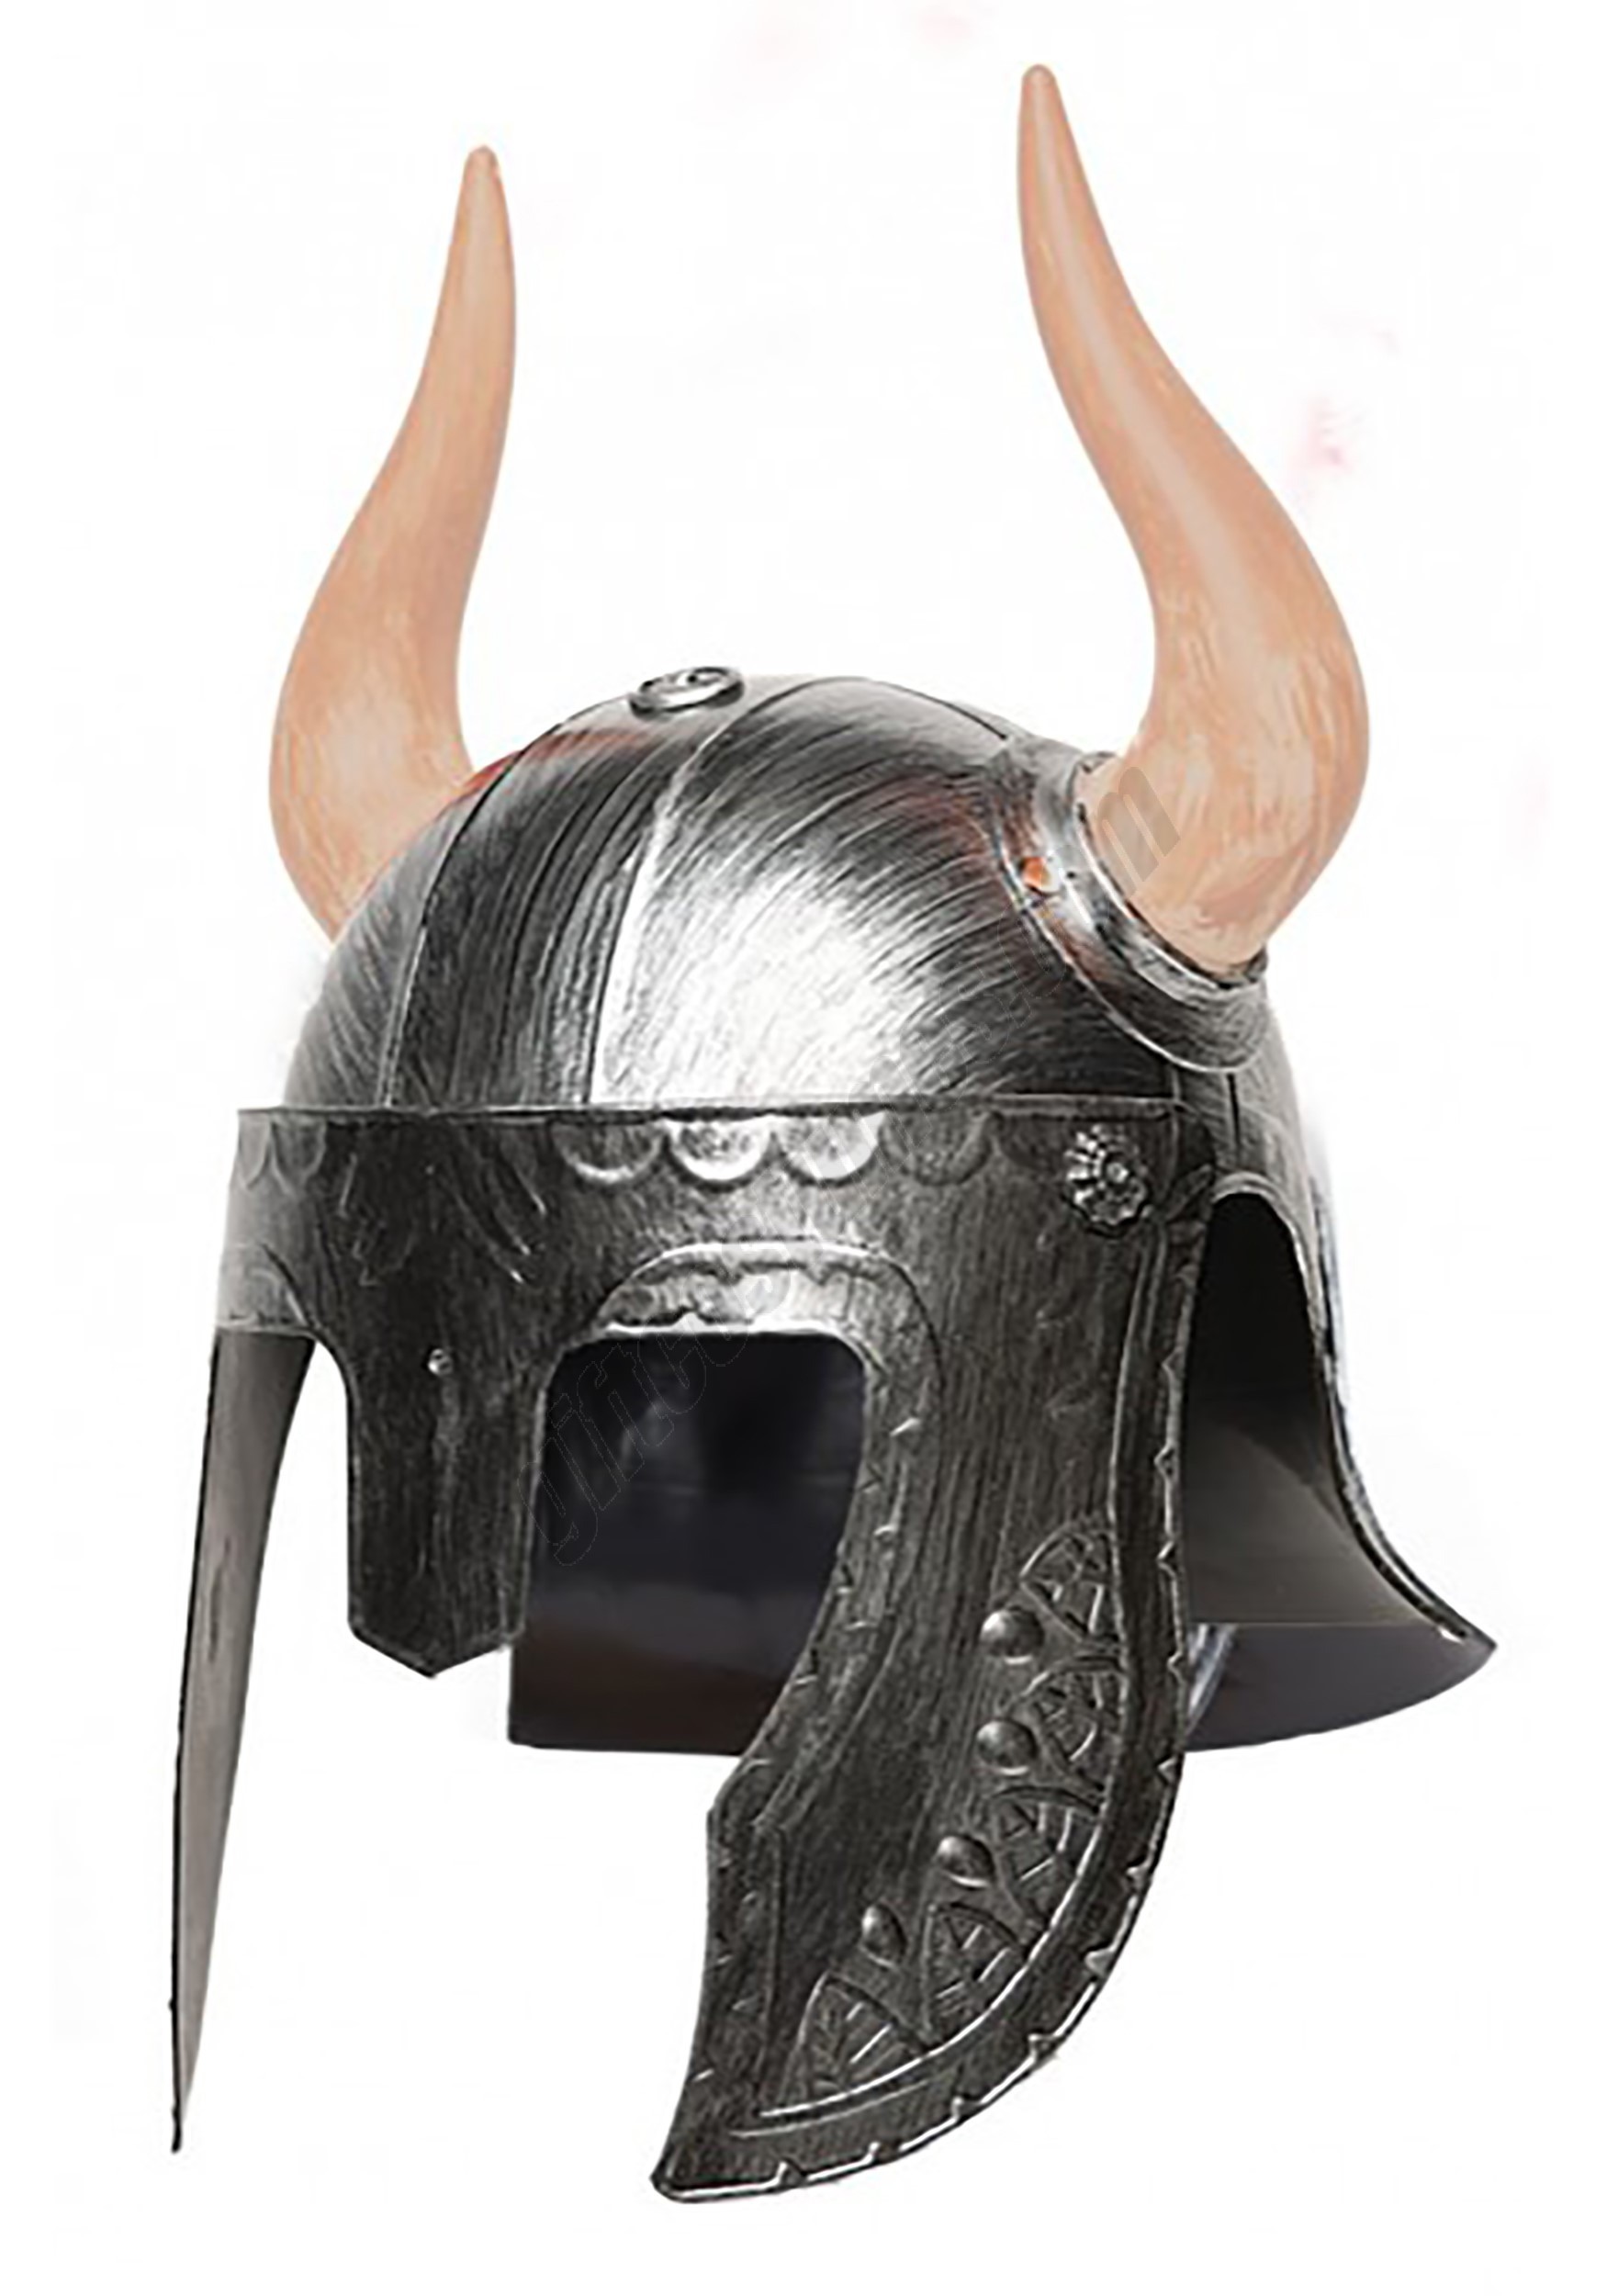 Silver Horned Adult Helmet Promotions - Silver Horned Adult Helmet Promotions